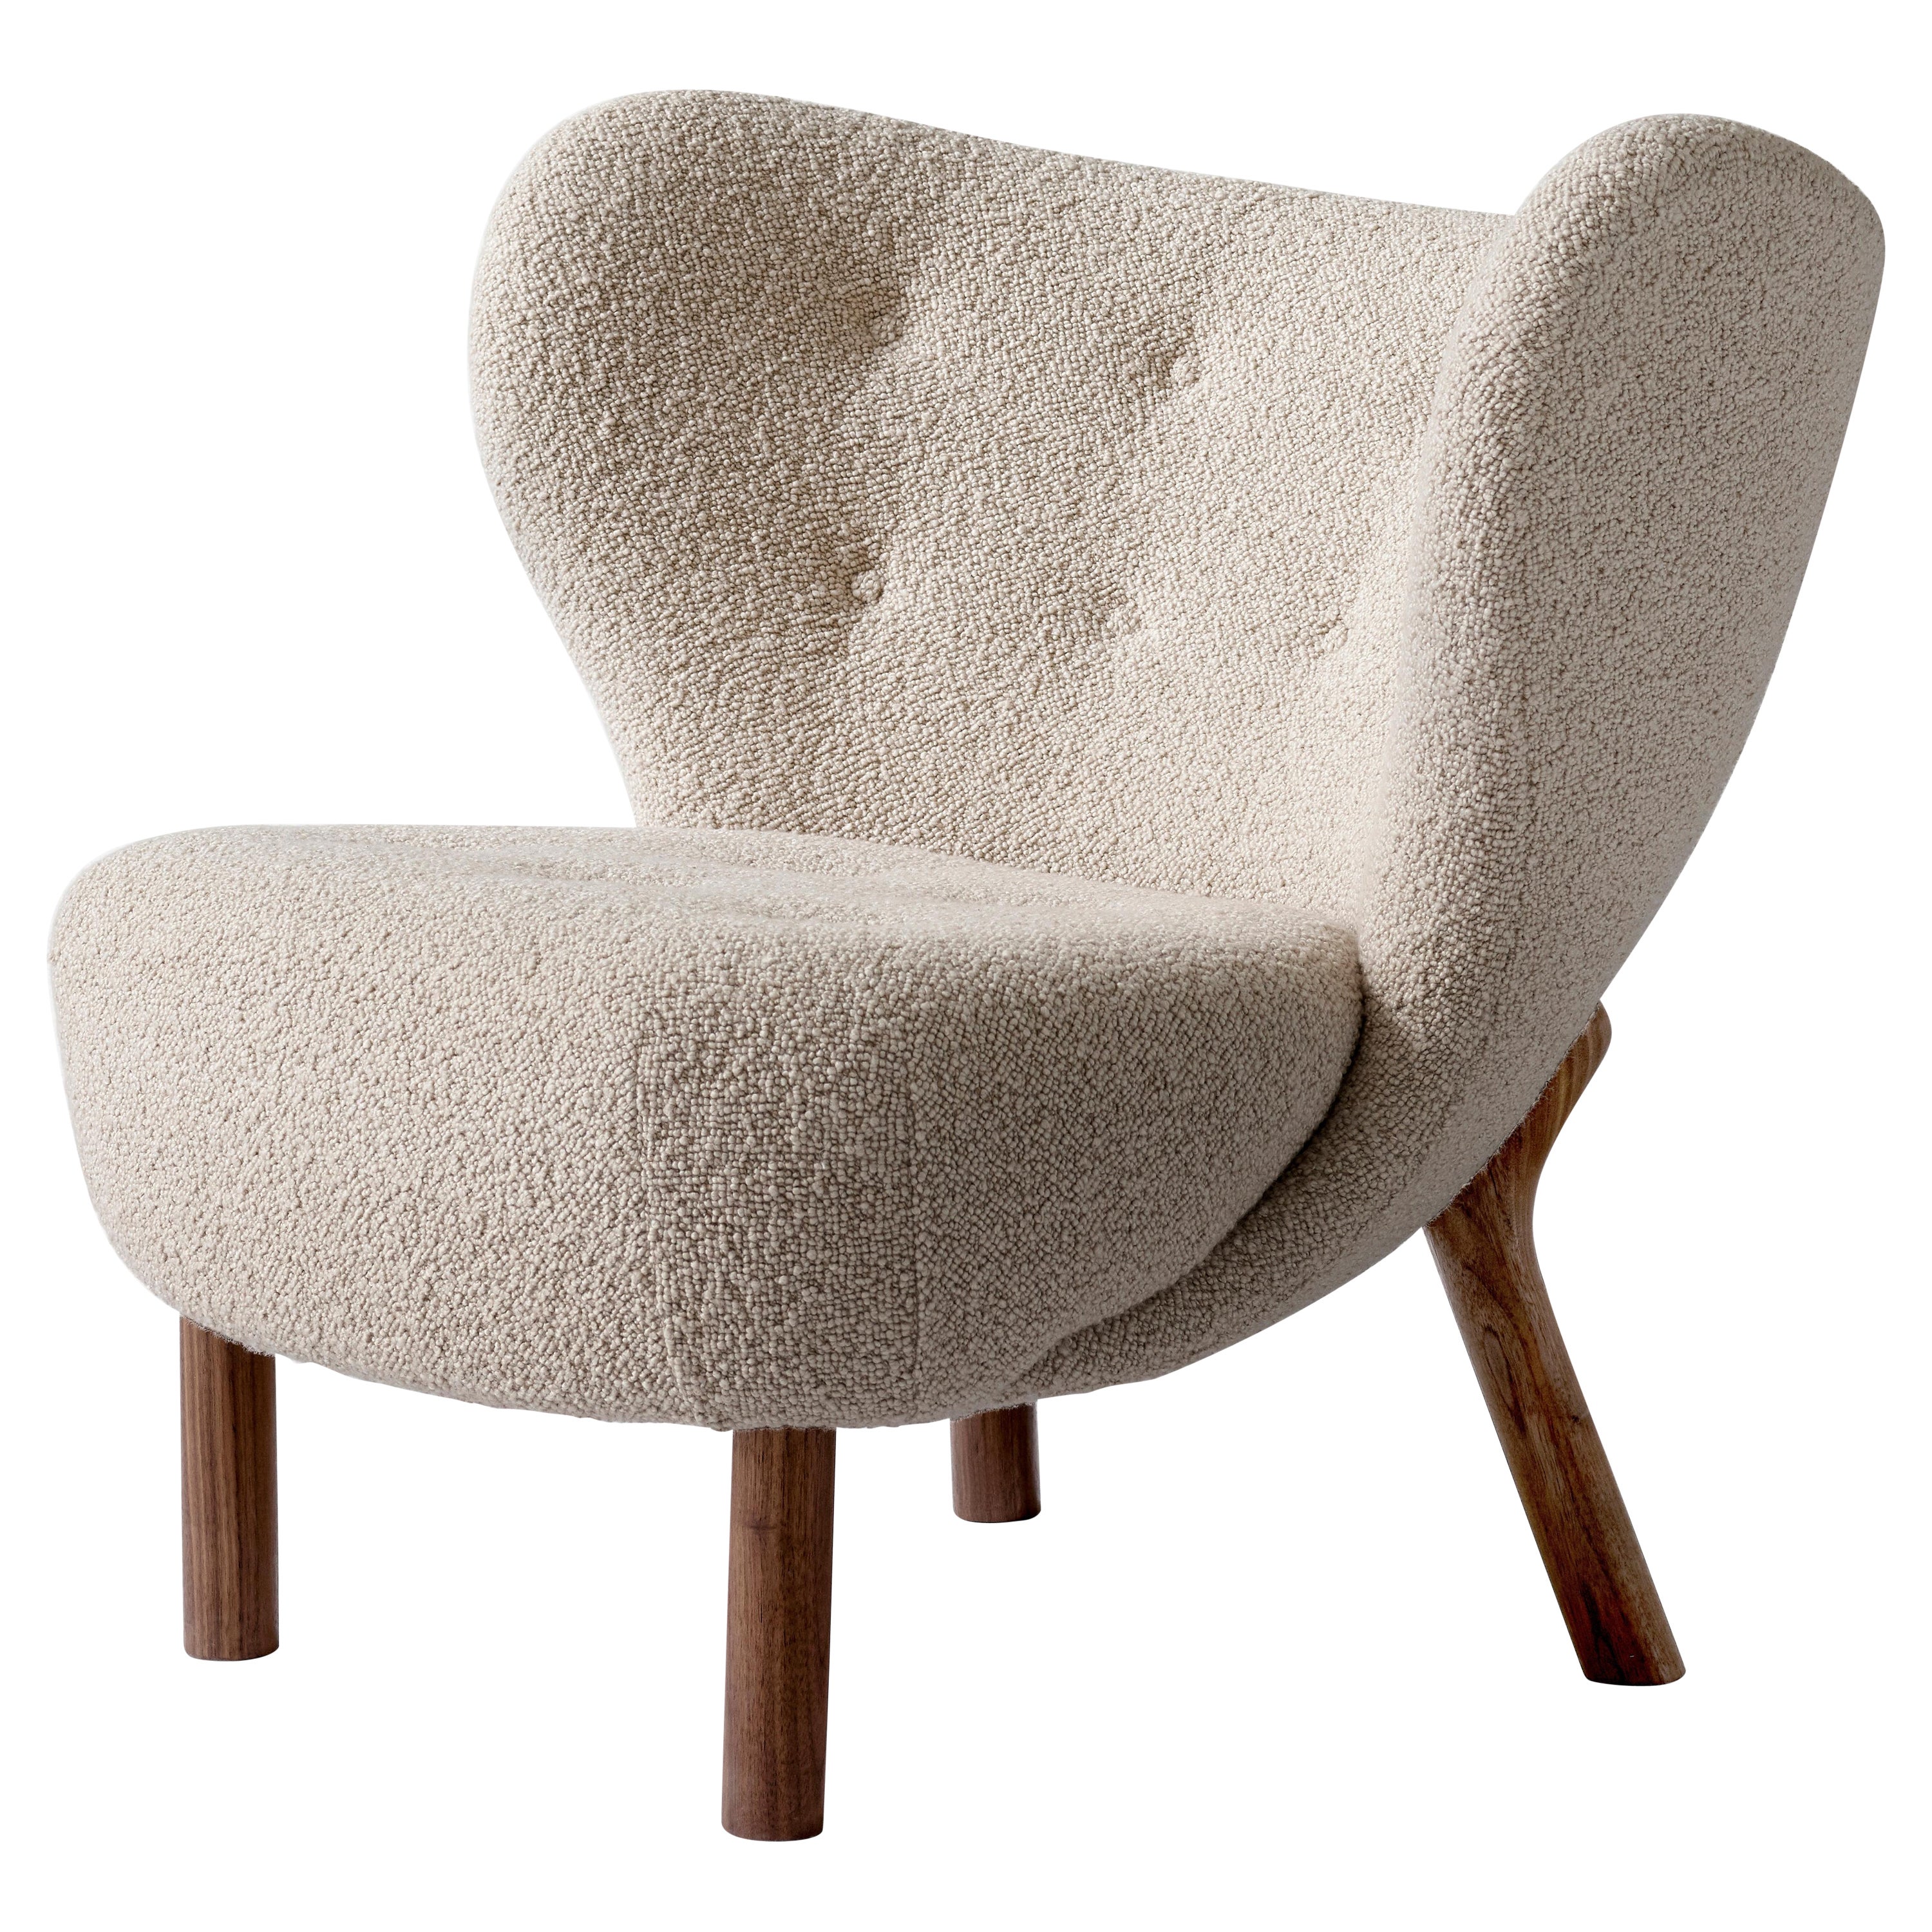 Little Petra VB1 Lounge Chair in Walnut & C.O.M 'Customer's Own Material' for AT&T. en vente